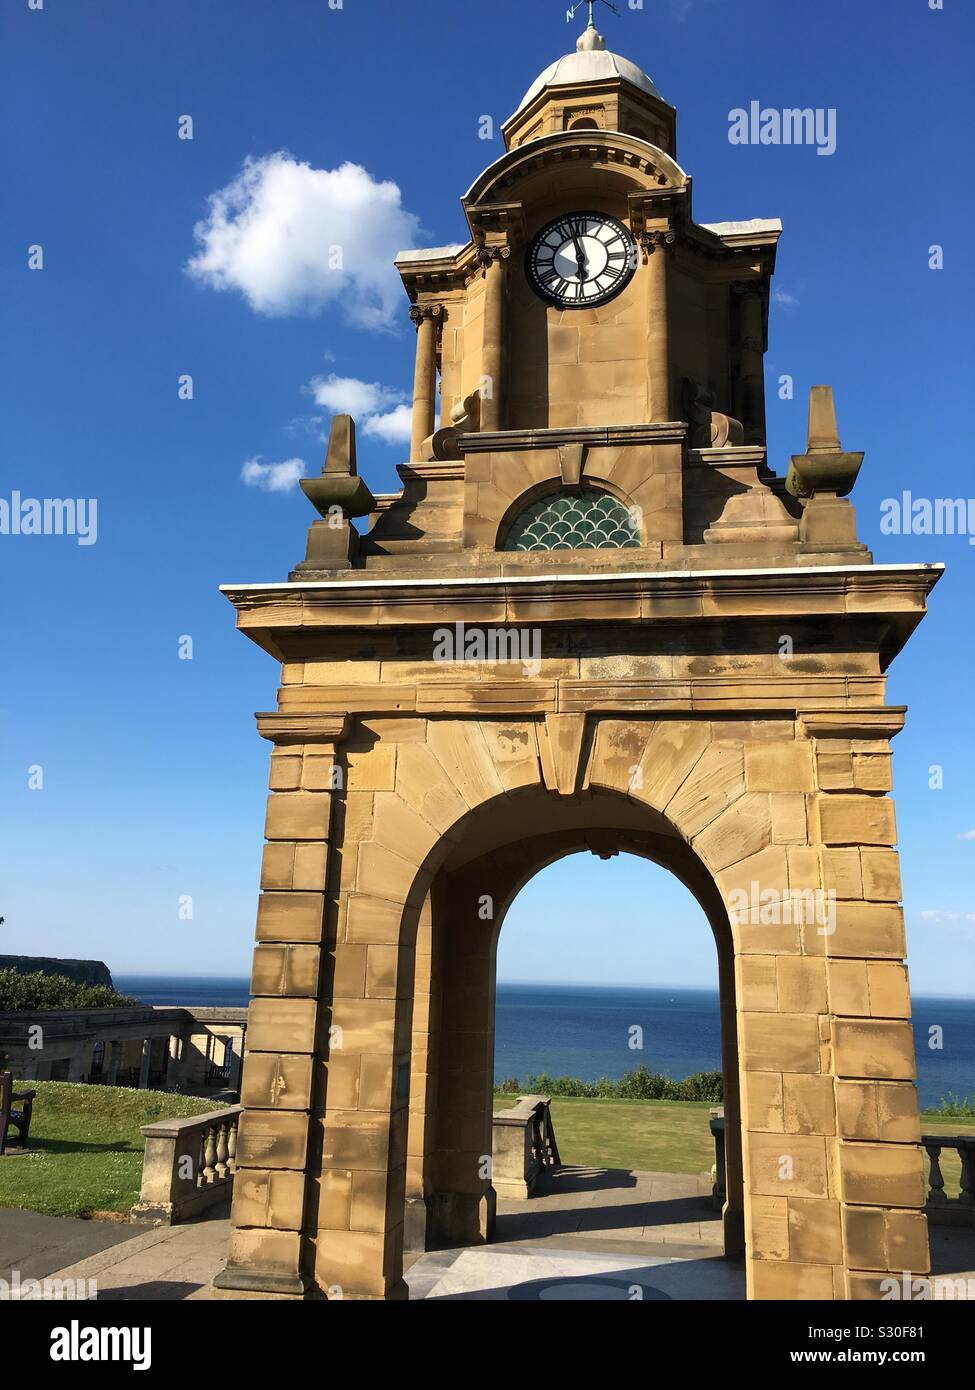 Clock tower at Scarborough, Yorkshire, United Kingdom Stock Photo